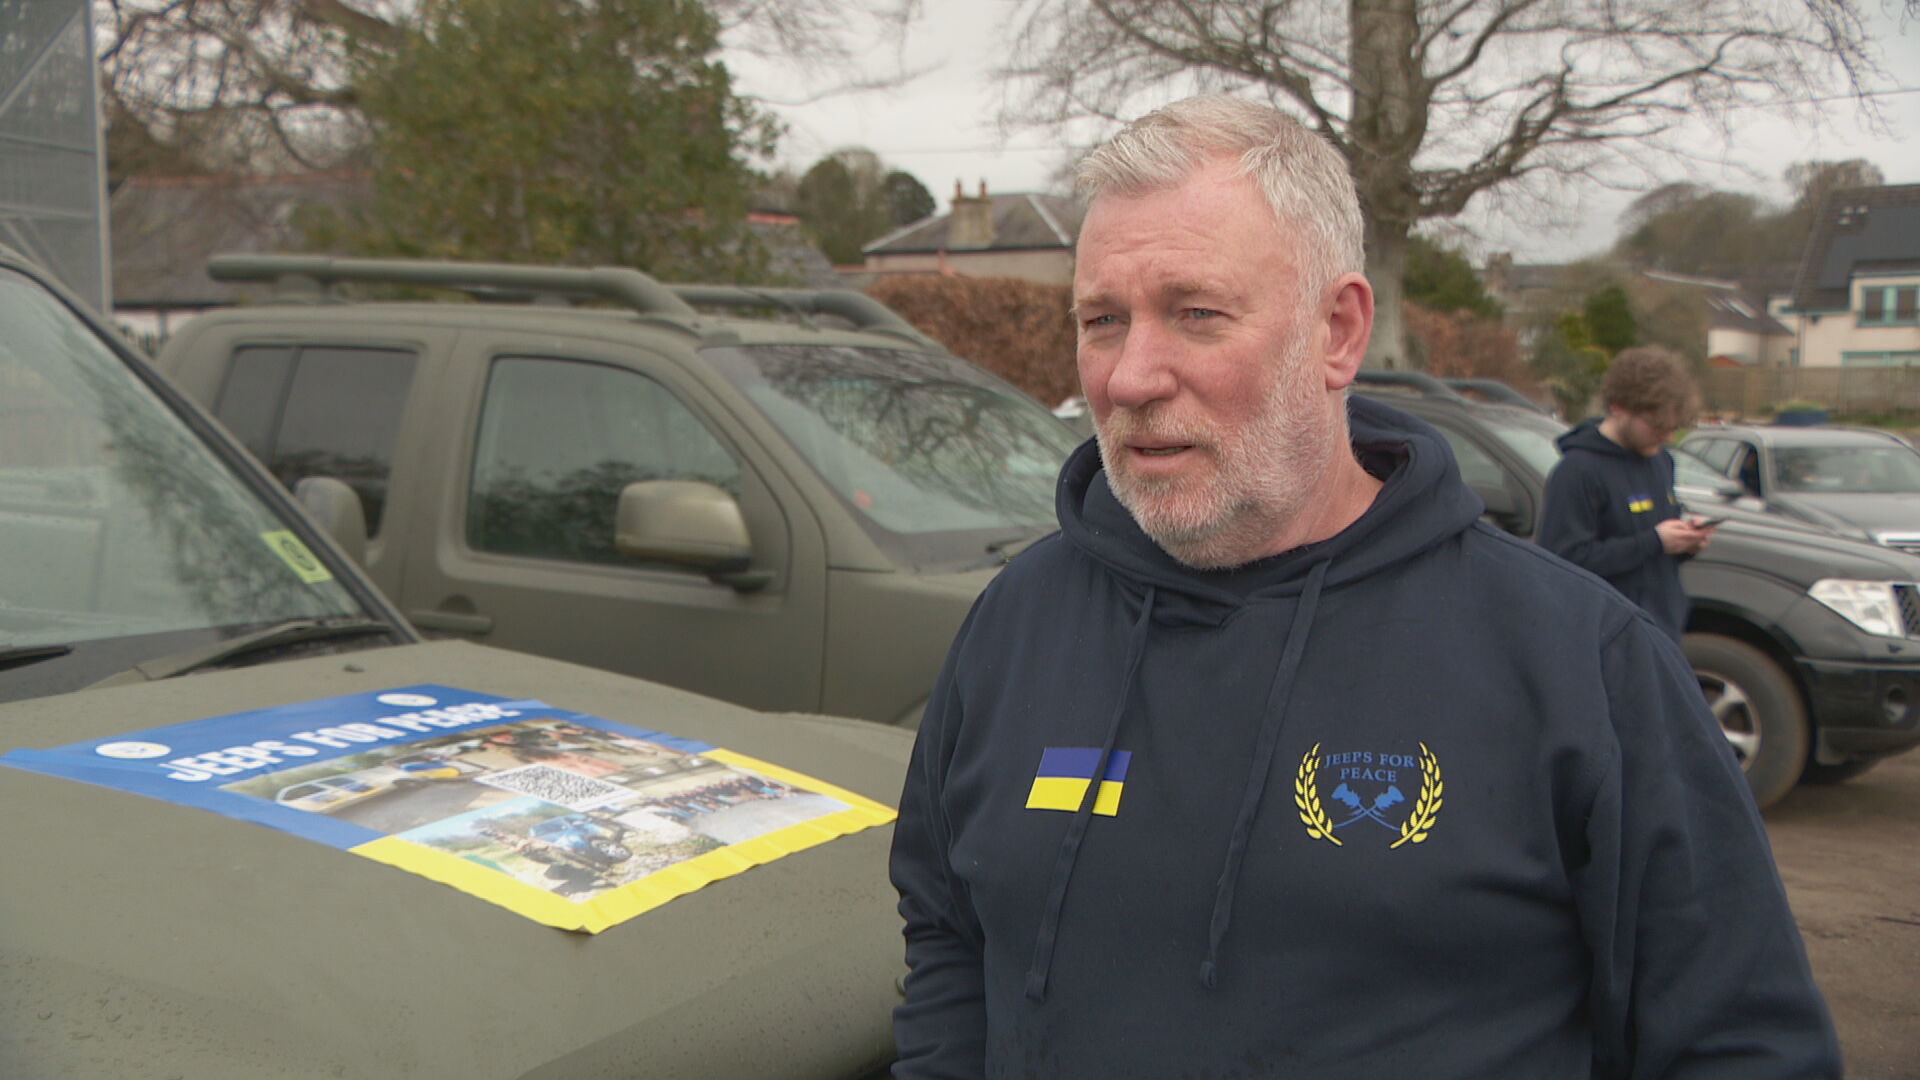 Co-founder of the group, Stewart Owen Ford, said that this would be their eighth large convoy with smaller trips happening in between to bring constant aid to war-struck victims. 